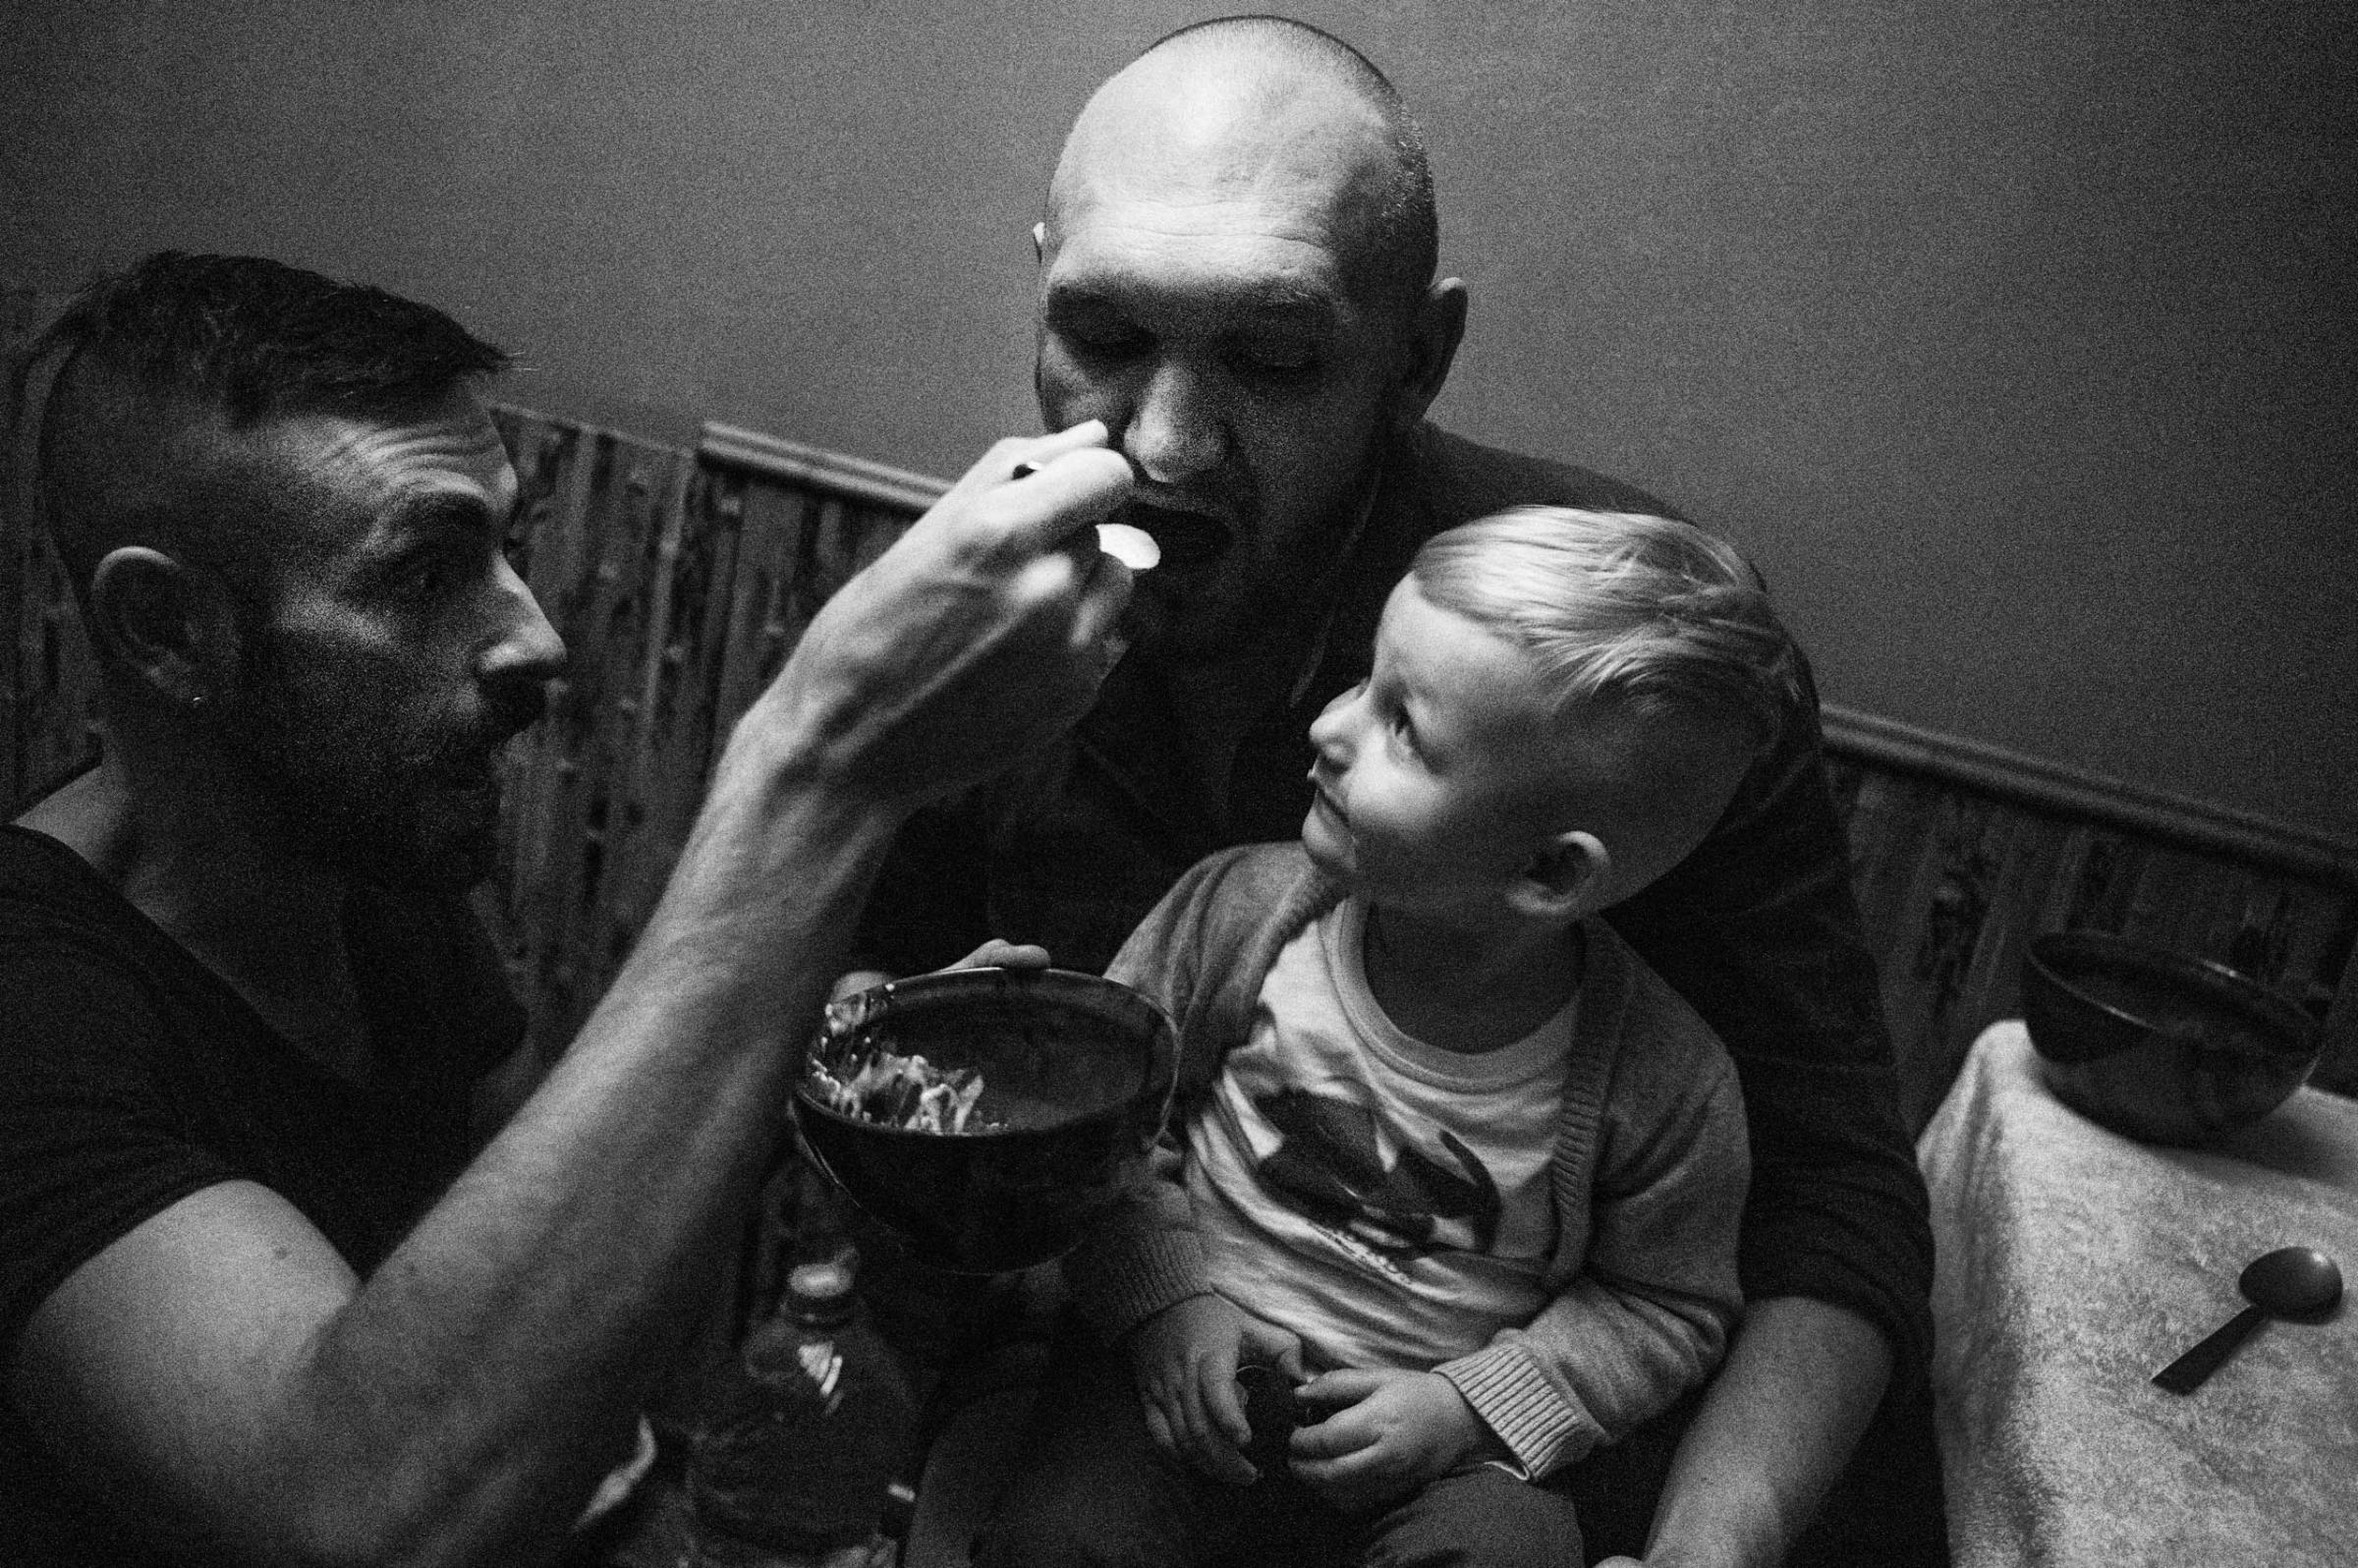 Bogdan is feeding Yegor, trying to convince Timur to eat his dinner.